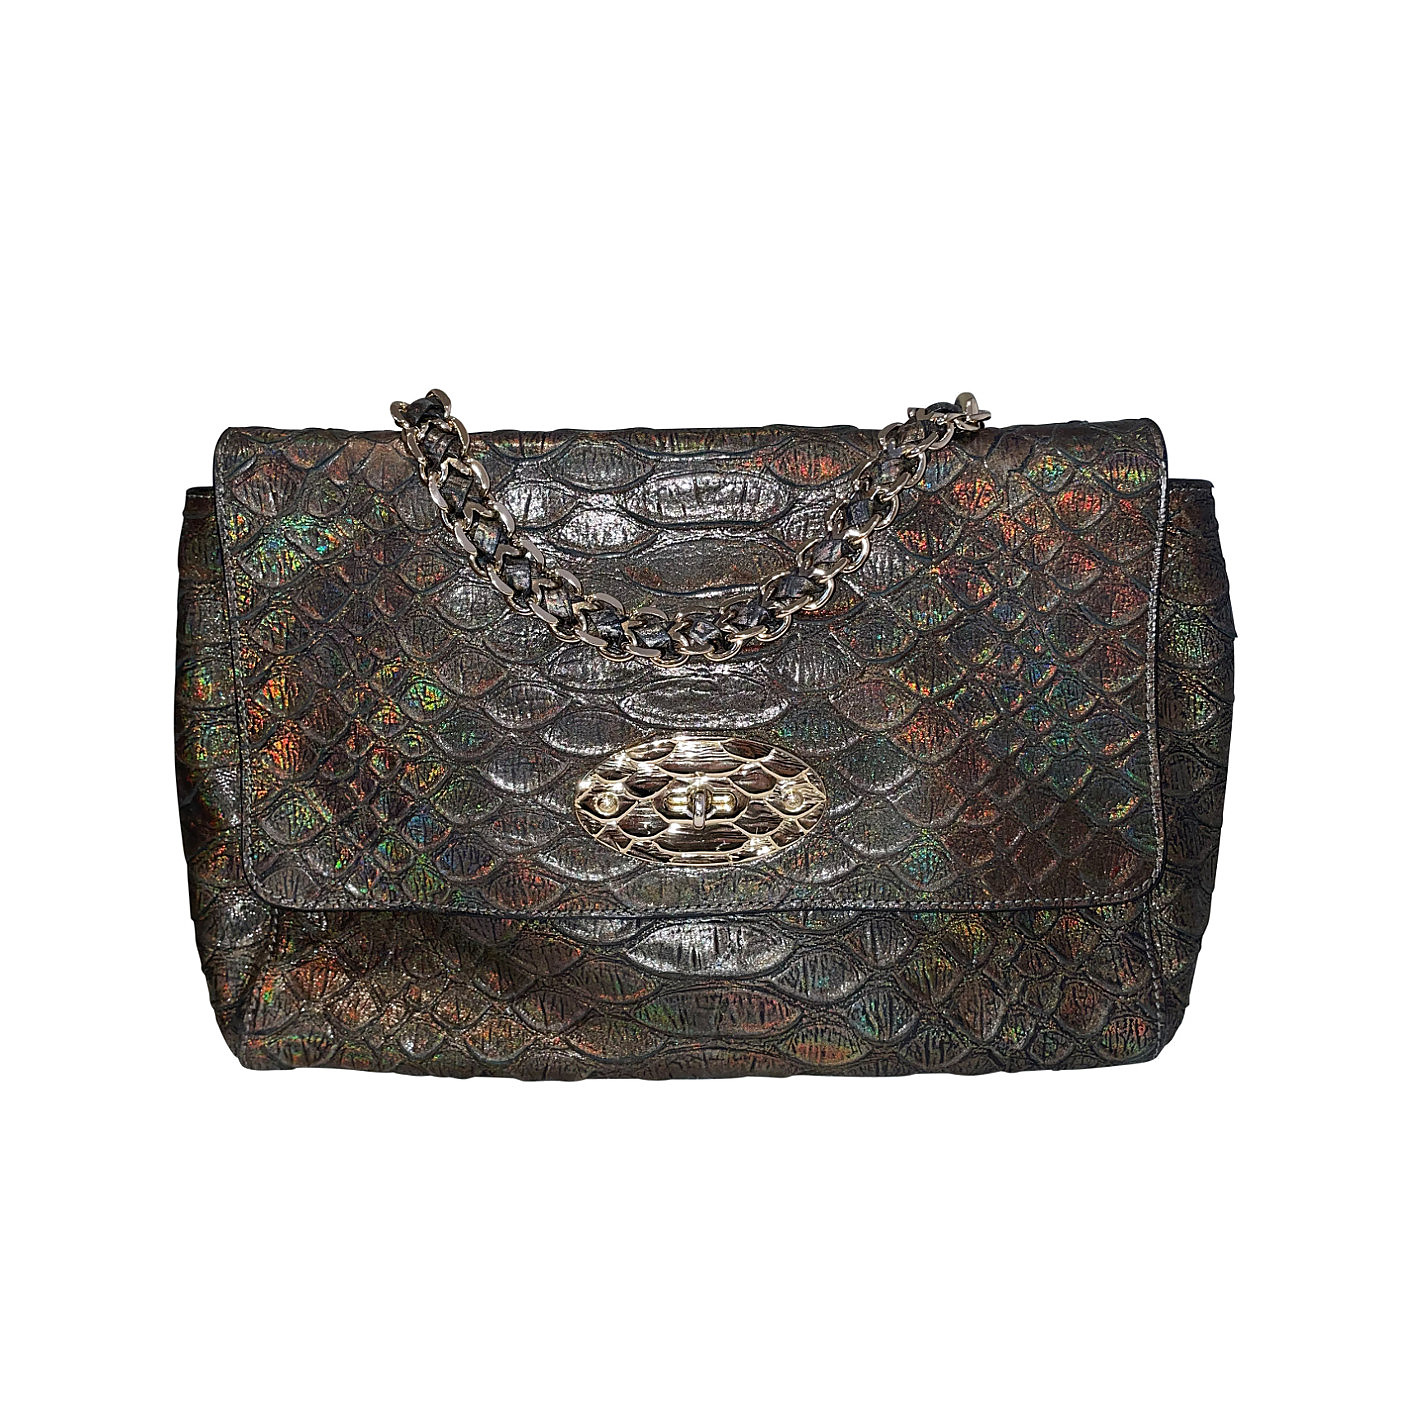 Mulberry Embossed Metallic Leather Bag